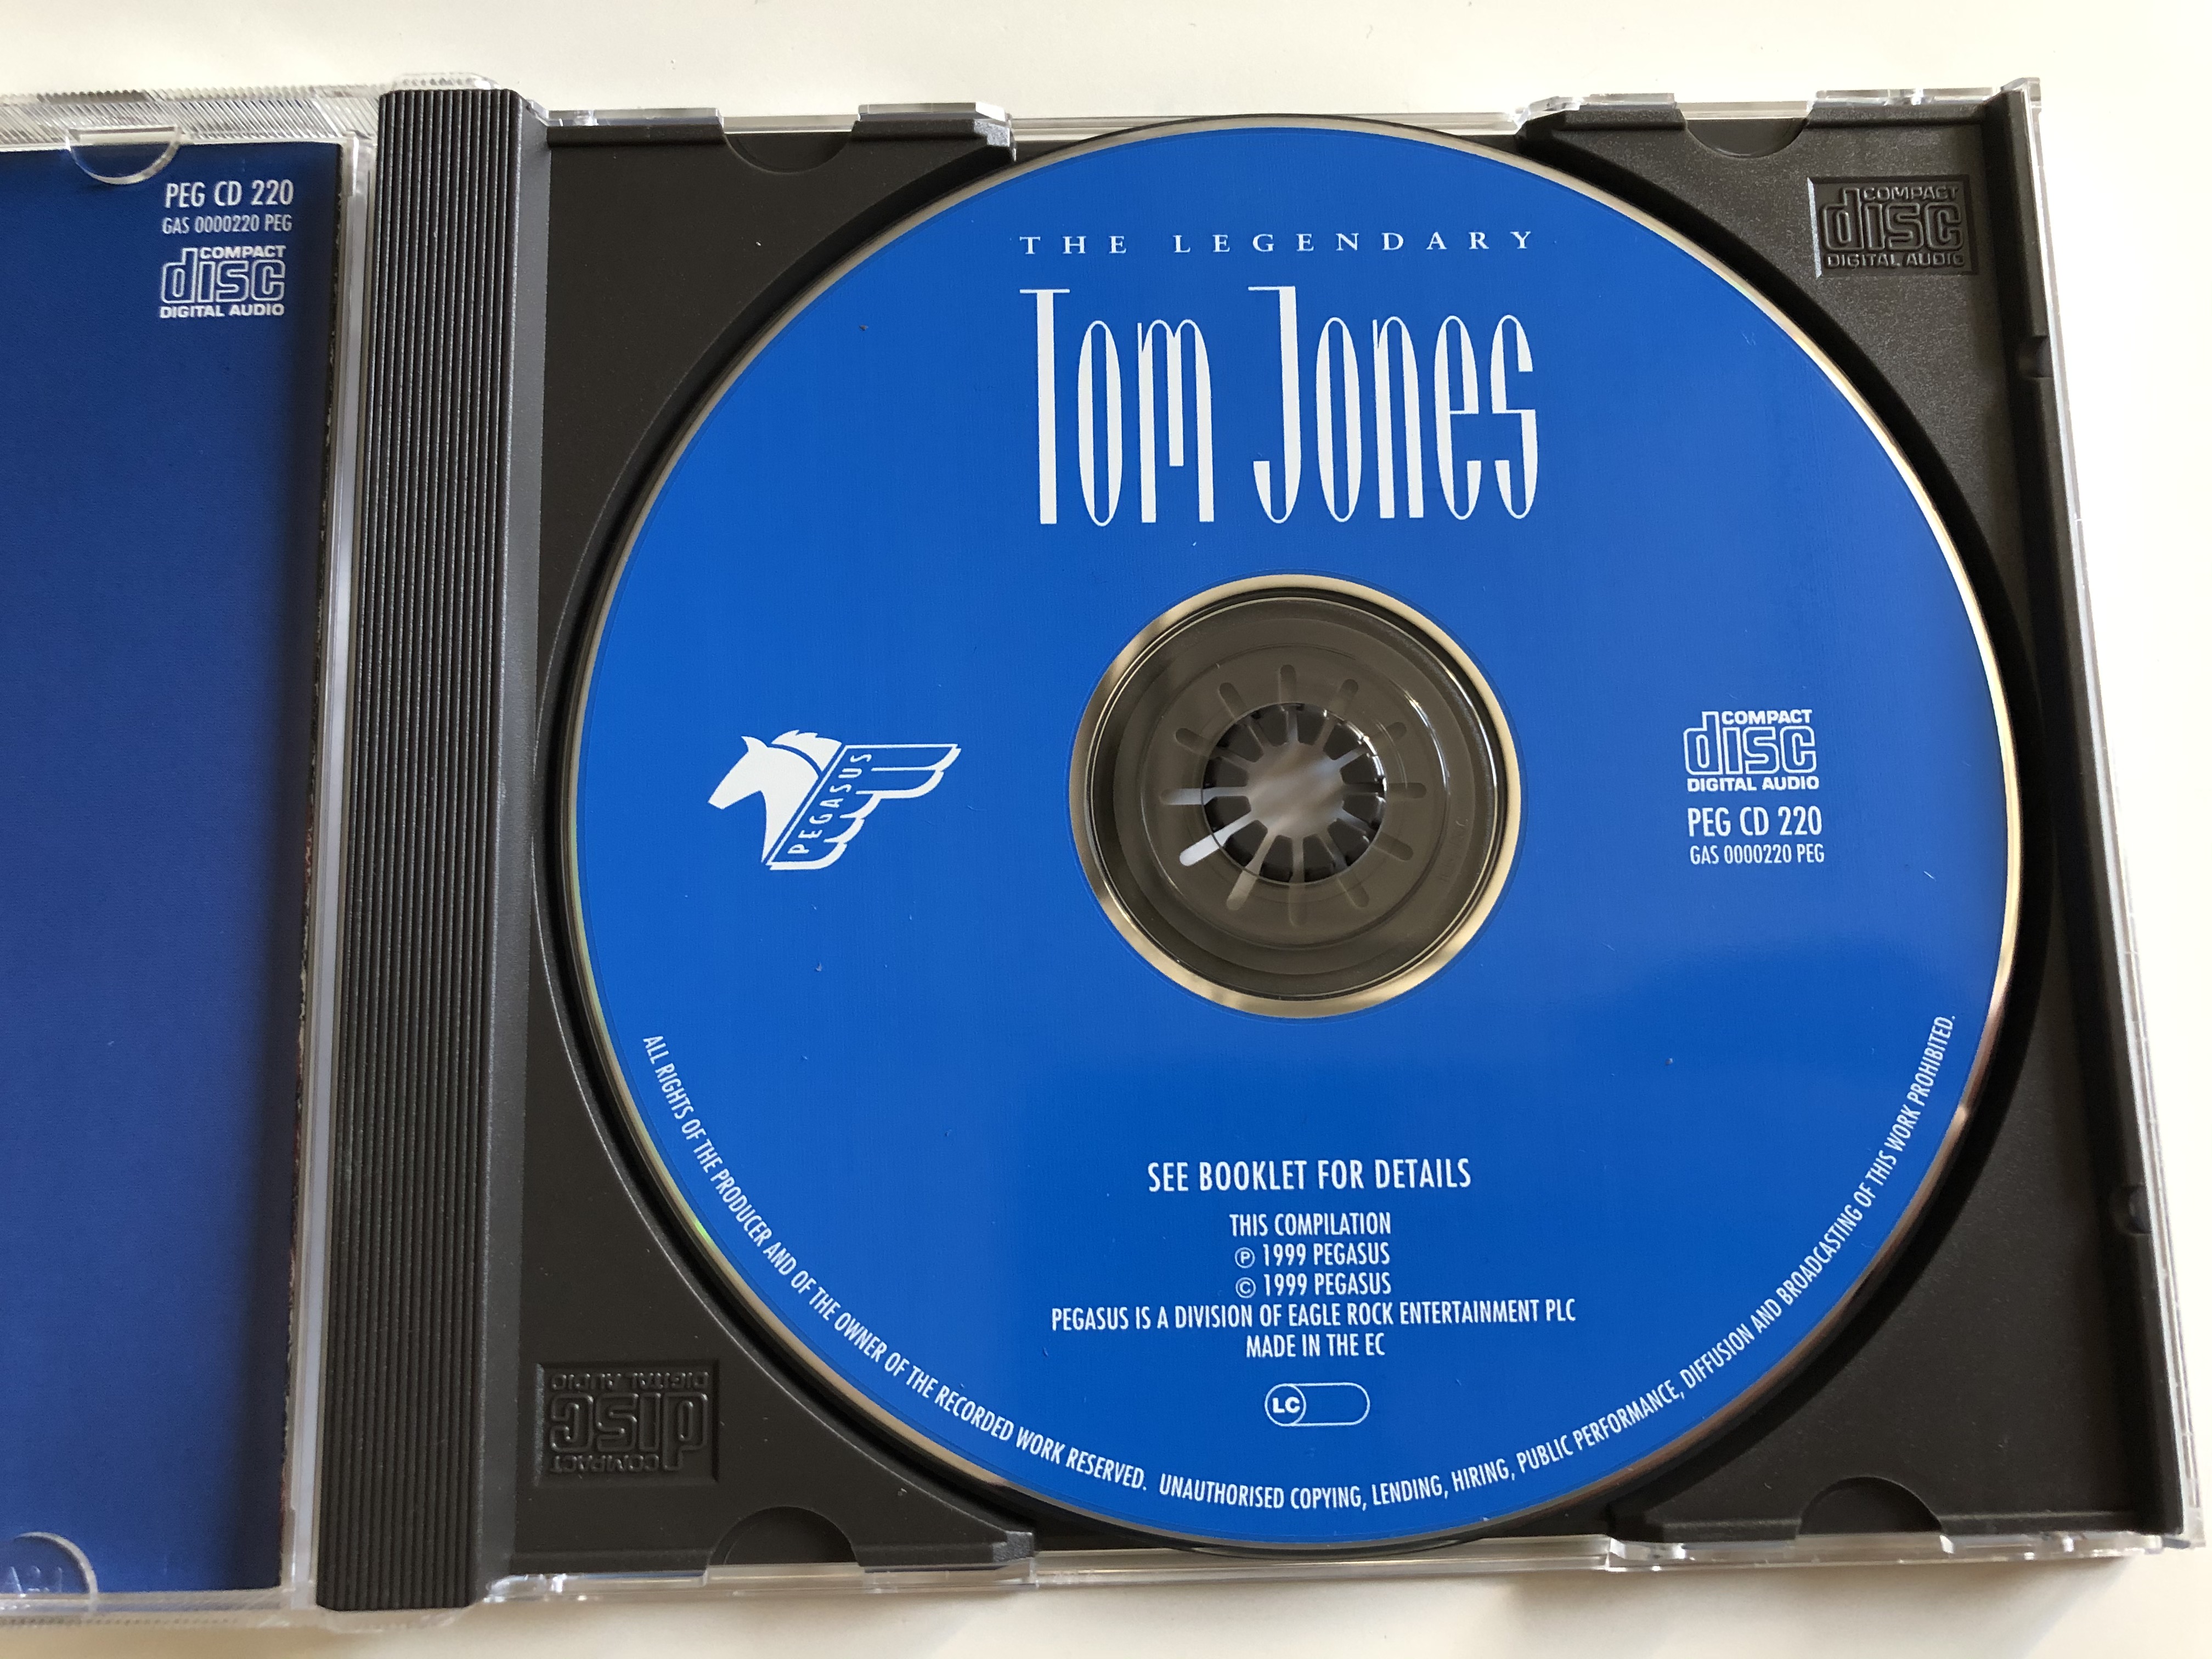 the-legendary-tom-jones-including-what-s-new-pussycat-i-can-see-clearly-now-memphis-tennessee-lay-down-sally-fever-pegasus-audio-cd-1999-peg-cd-220-4-.jpg